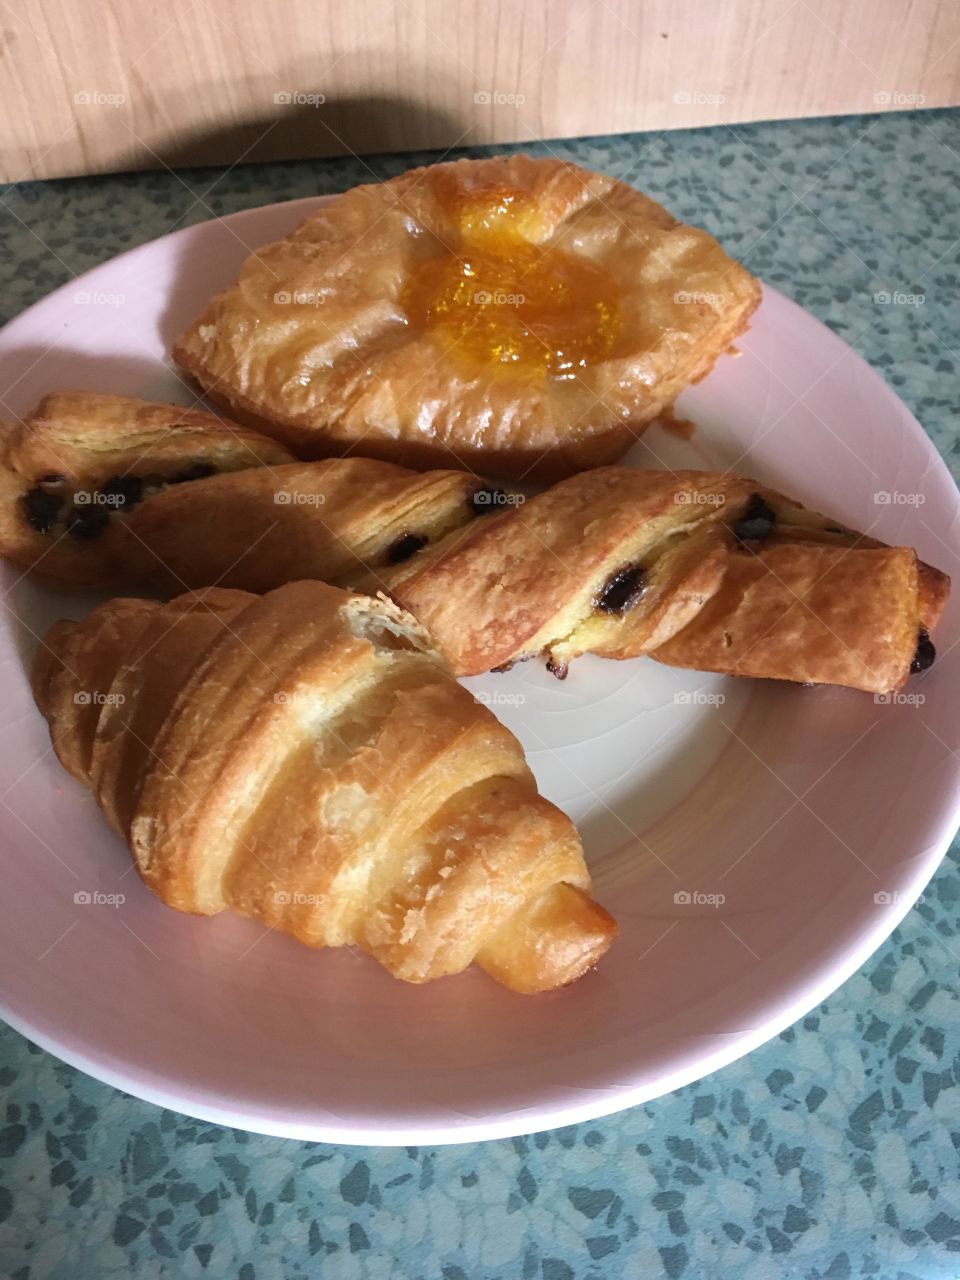 Delicious selection of gluten free continental pastries by marks and Spencer’s - croissant, Belgian chocolate twist and apricot pastry. 